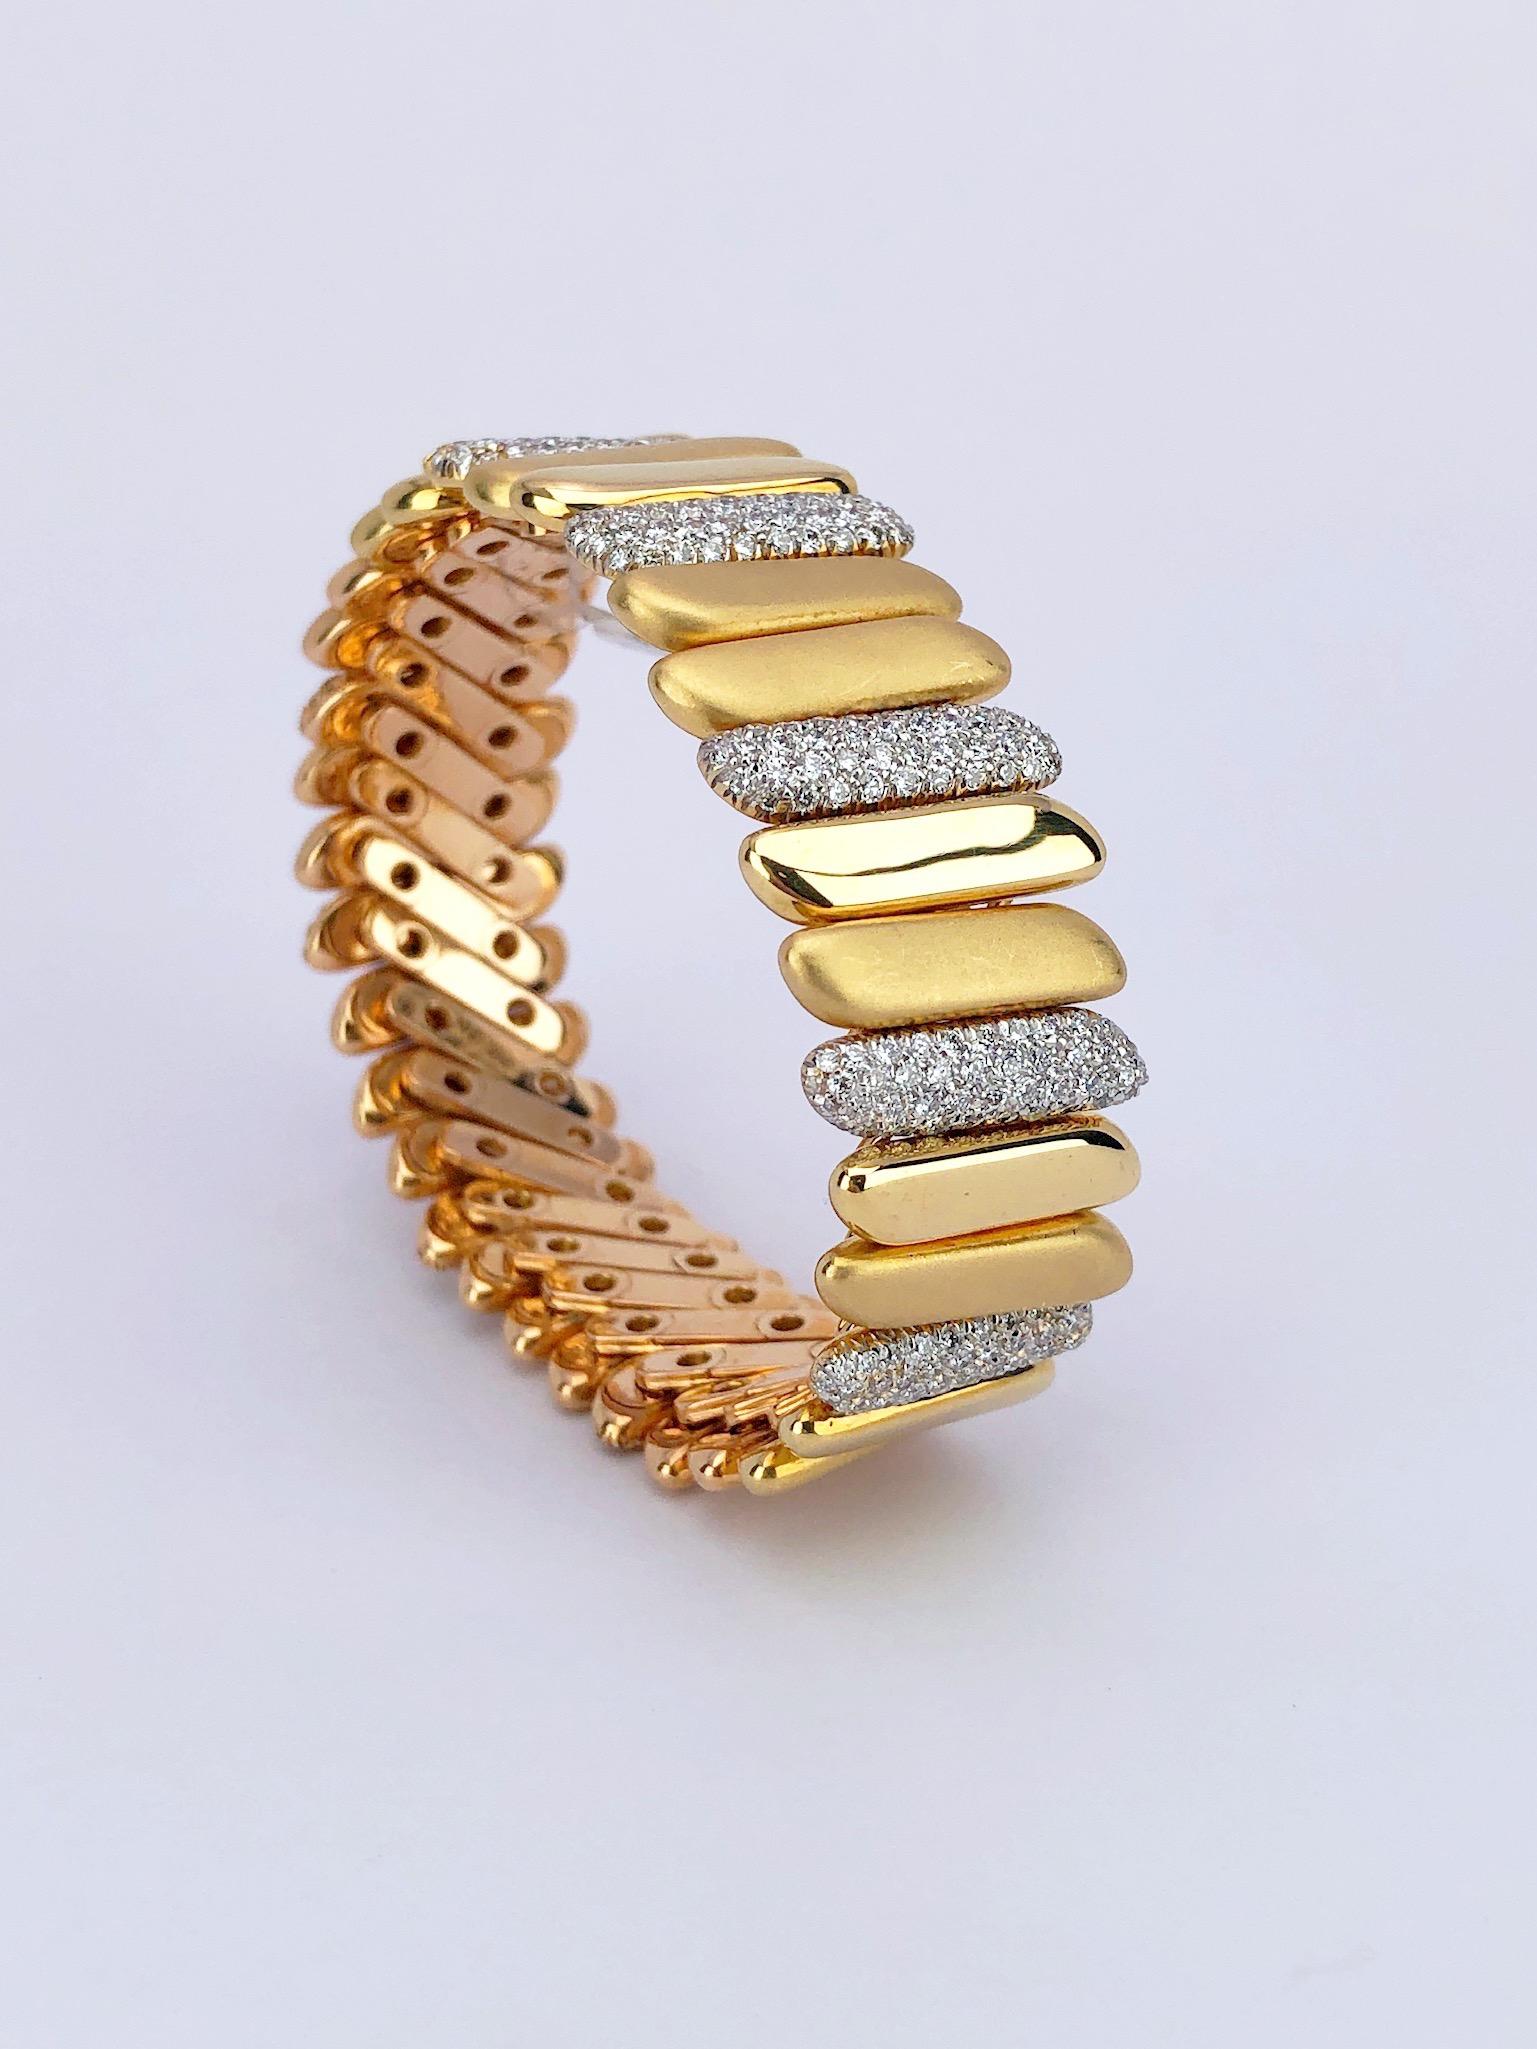 The best of both worlds describes this bracelet perfectly. Composed of rose gold links set with cognac diamonds, along with polished and satin finished same shape motifs. The reverse side is yellow gold with pave diamonds set in white gold following